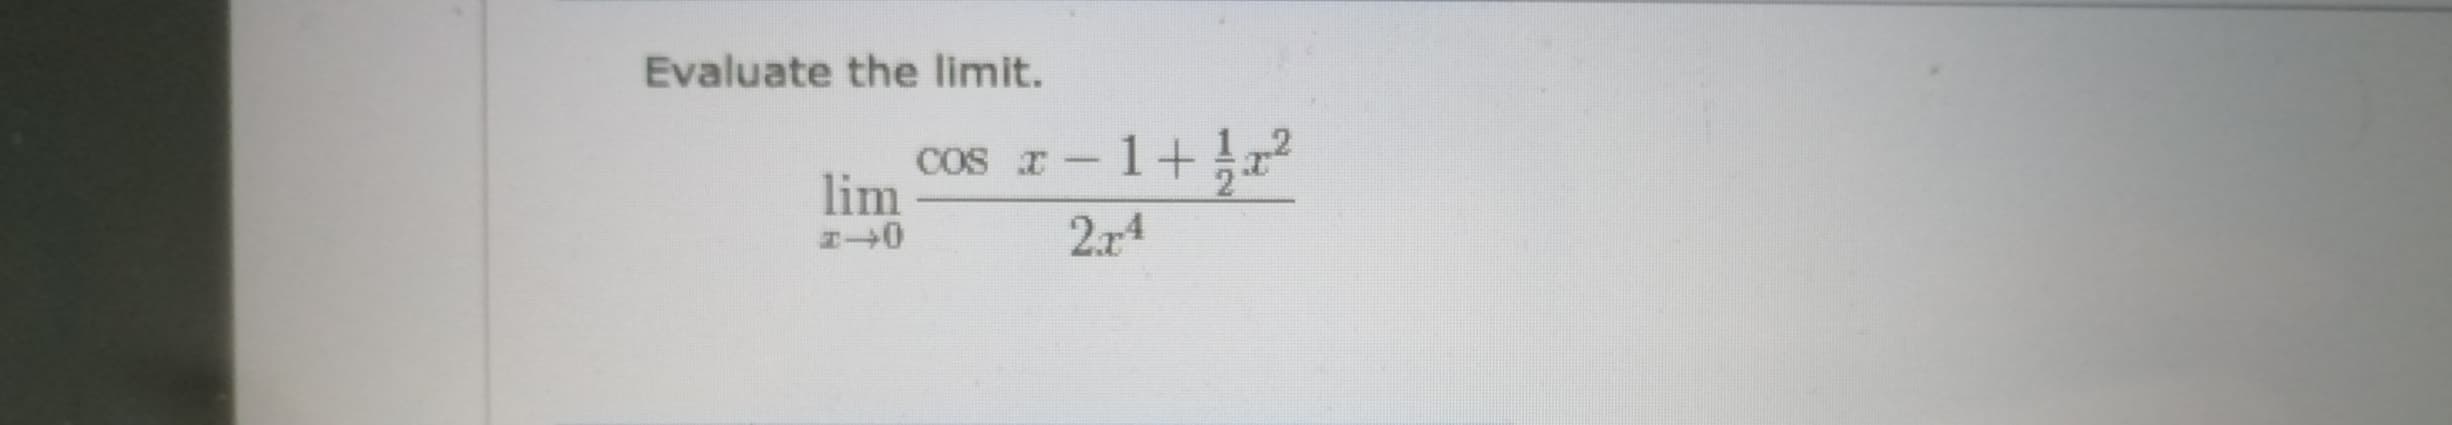 Evaluate the limit.
–1+}²
1.2
COS I
lim
2.x4
